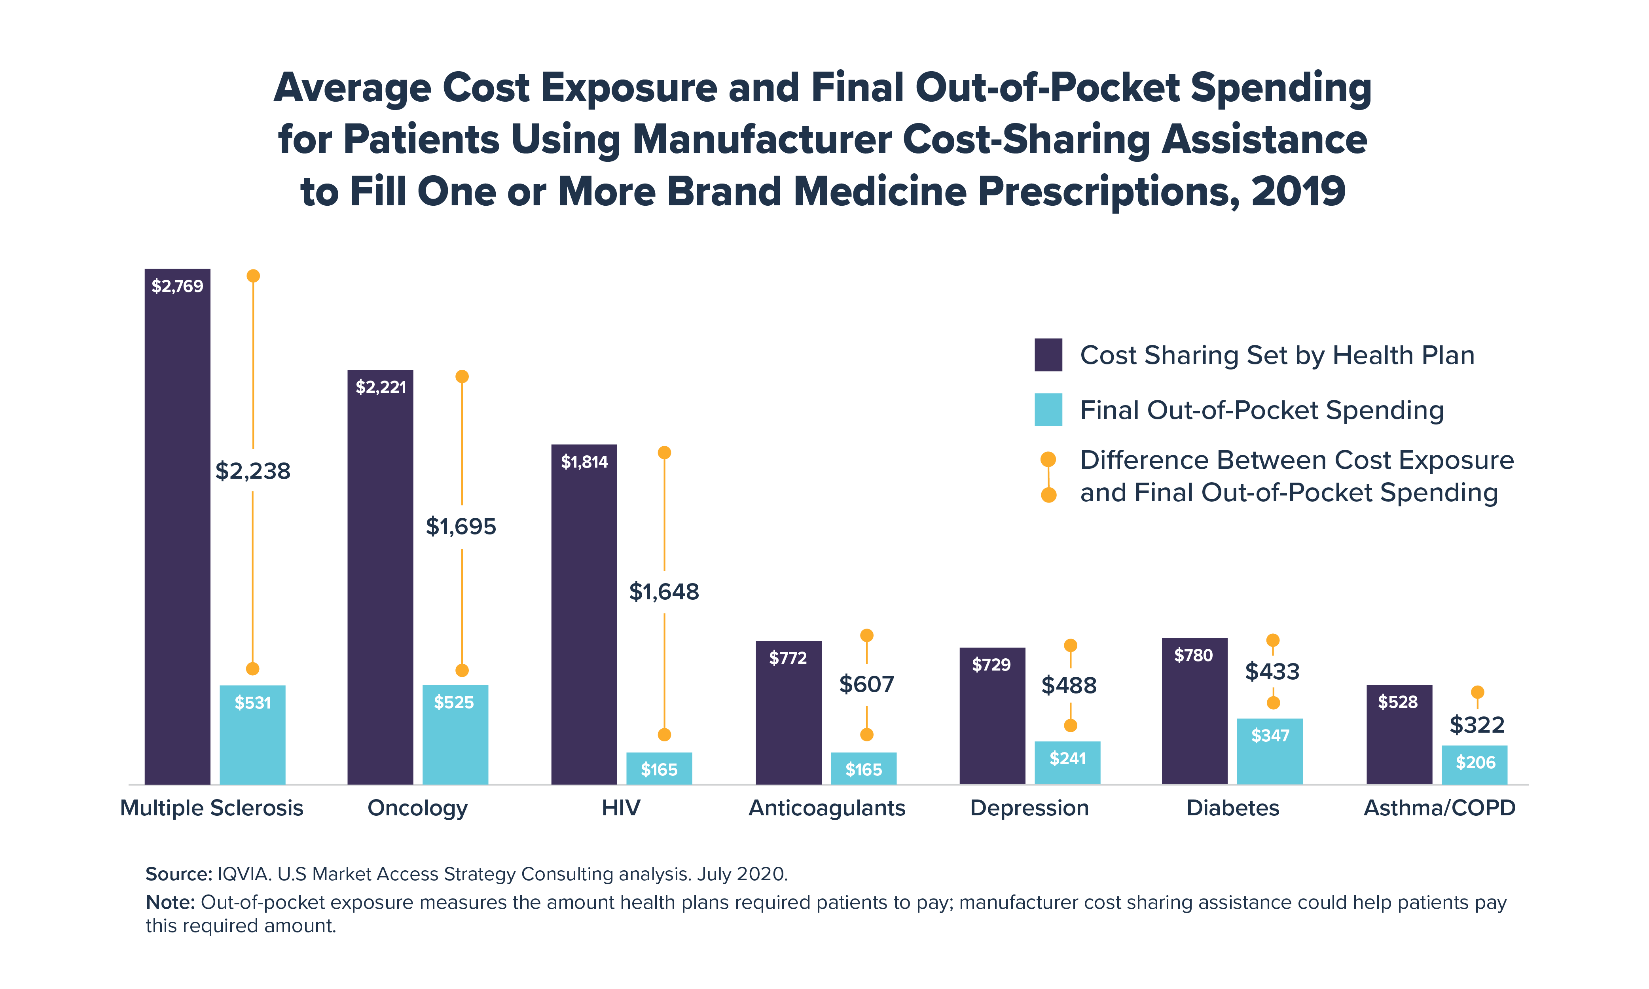 Average Cost Exposure and Final Out-of-Pocket Spending for Patients Using Manufacturer Cost-Sharing Assistance to Fill One or More brand Meidicne presciptions 2019